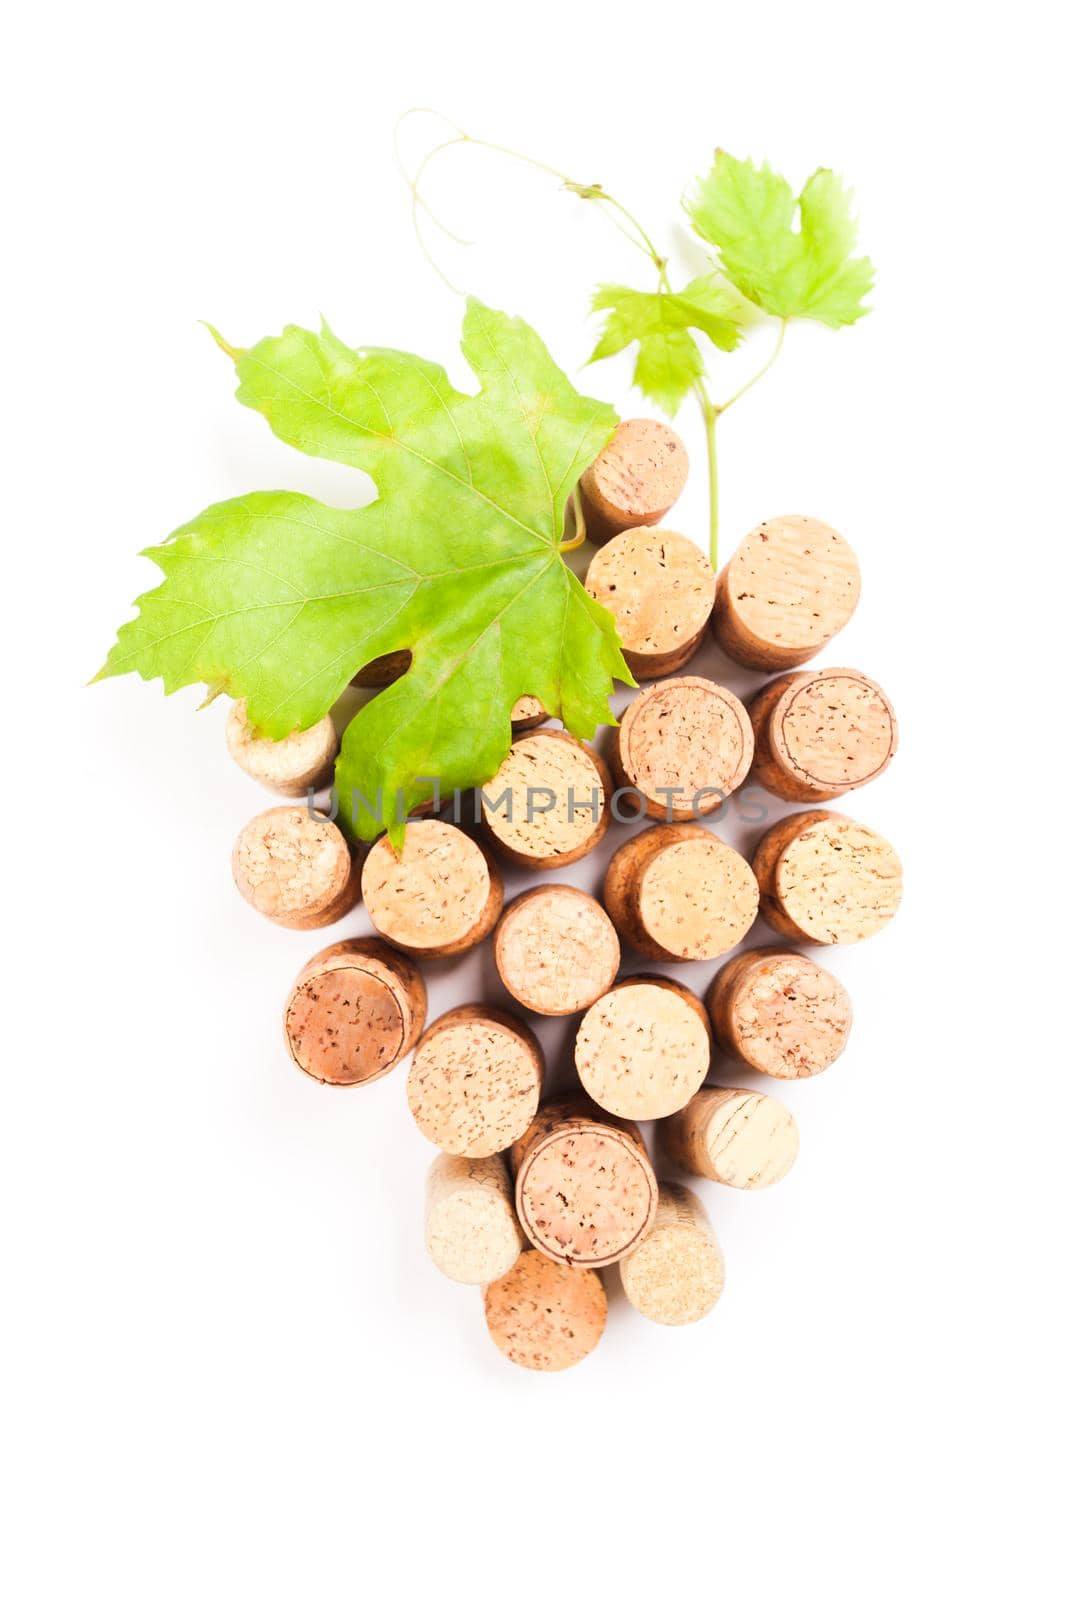 Wine corks isolated on white in grape shape with green leaf